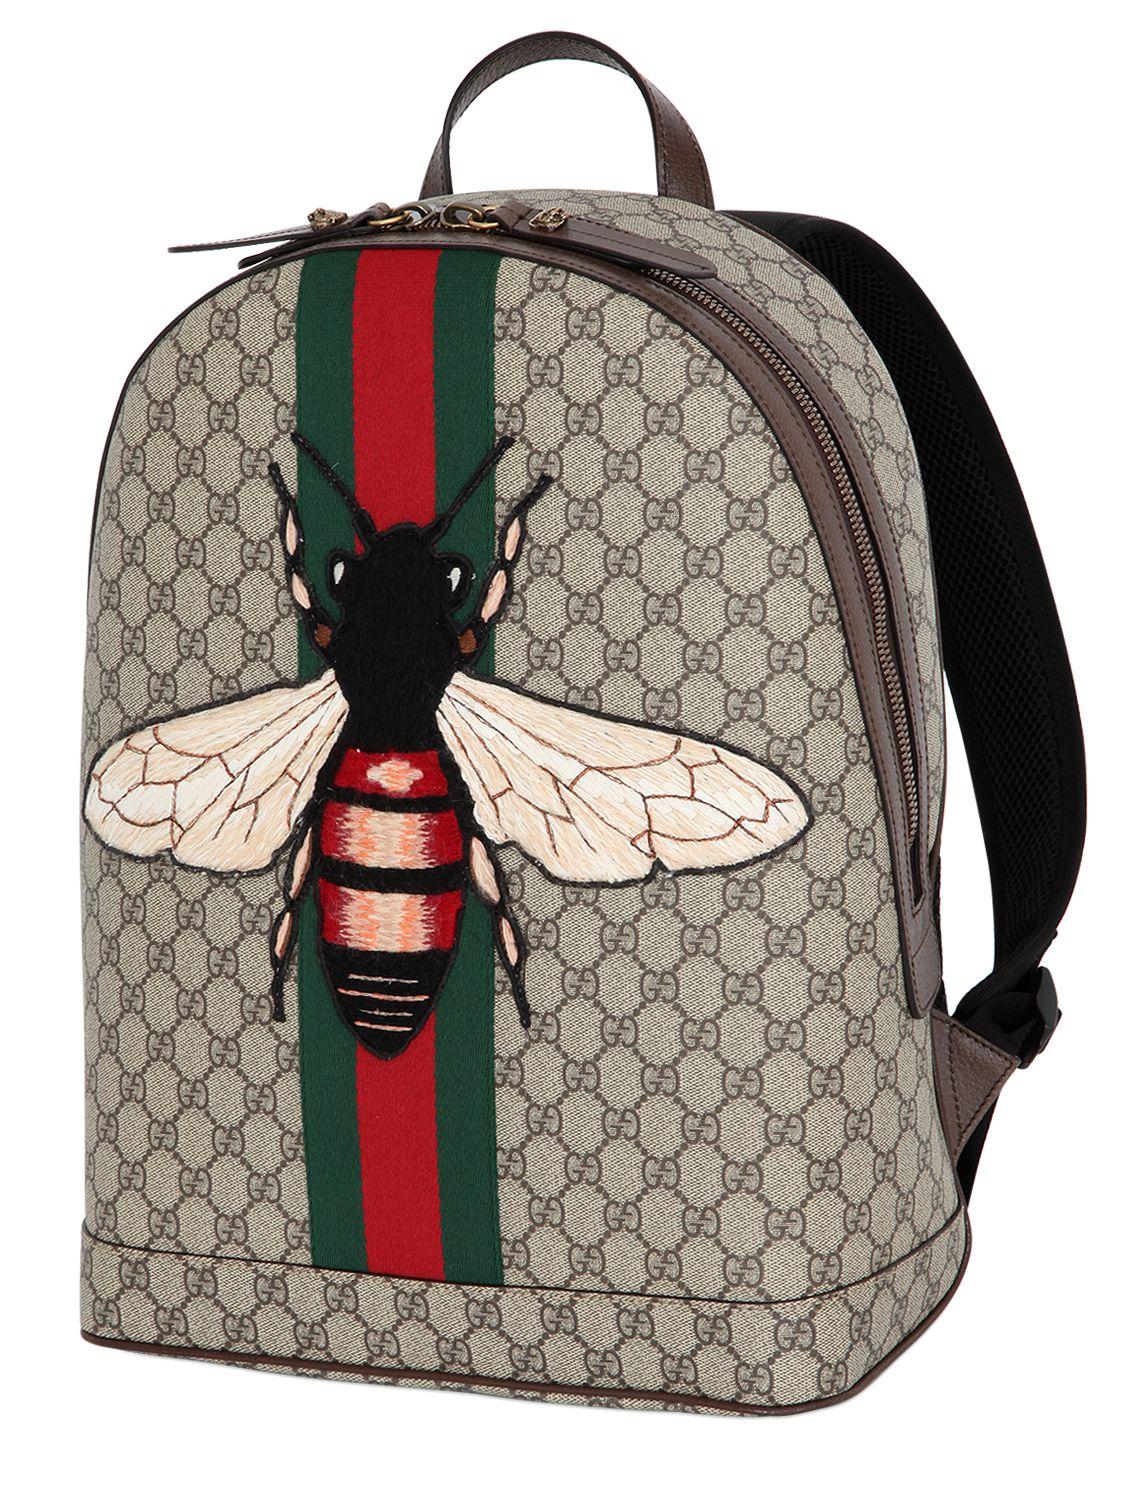 Gucci Bee Patch Gg Supreme Backpack in Natural - Lyst